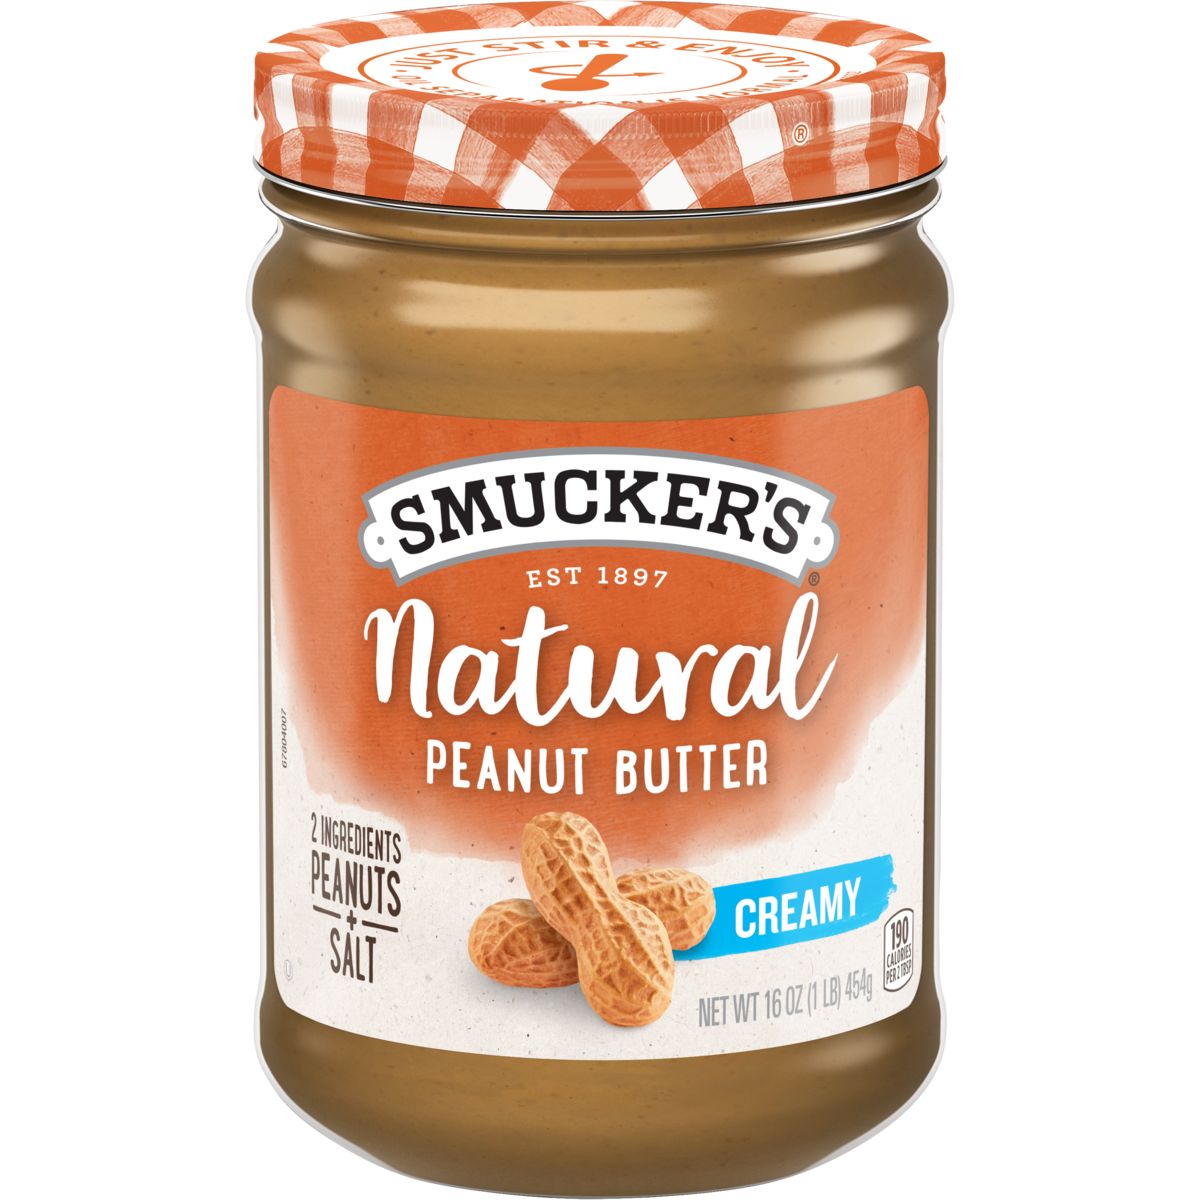 https://p-cdn6consumer.jmsinf.com/tmp/image-thumbnails/smuckers/products/PB/image-thumb__8265__auto_feab9401f1ce62dd47e2128655684d97/smucker-natural-creamy.jpg